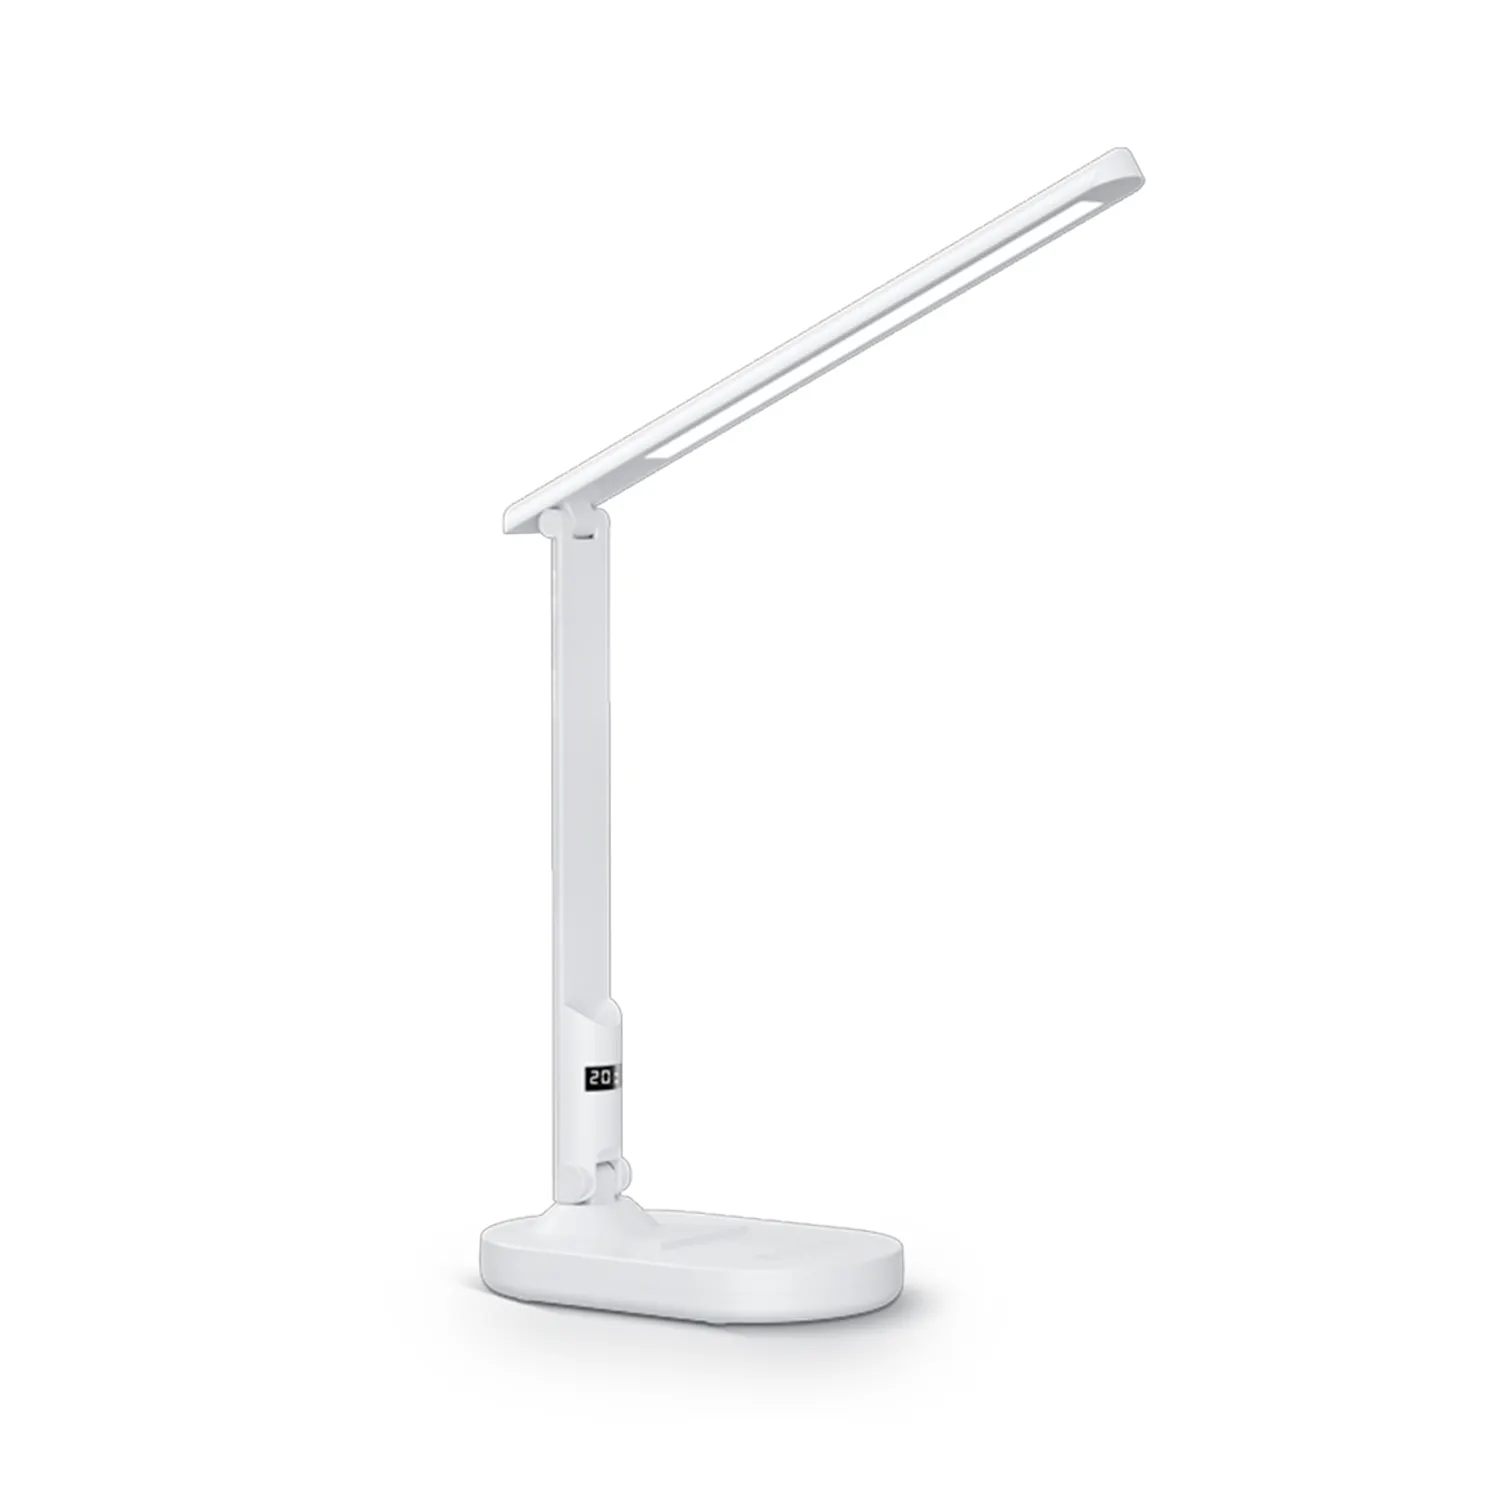 Hot selling simple desk lamp rechargeable modern LED desk lamp with USB learning desk lamp